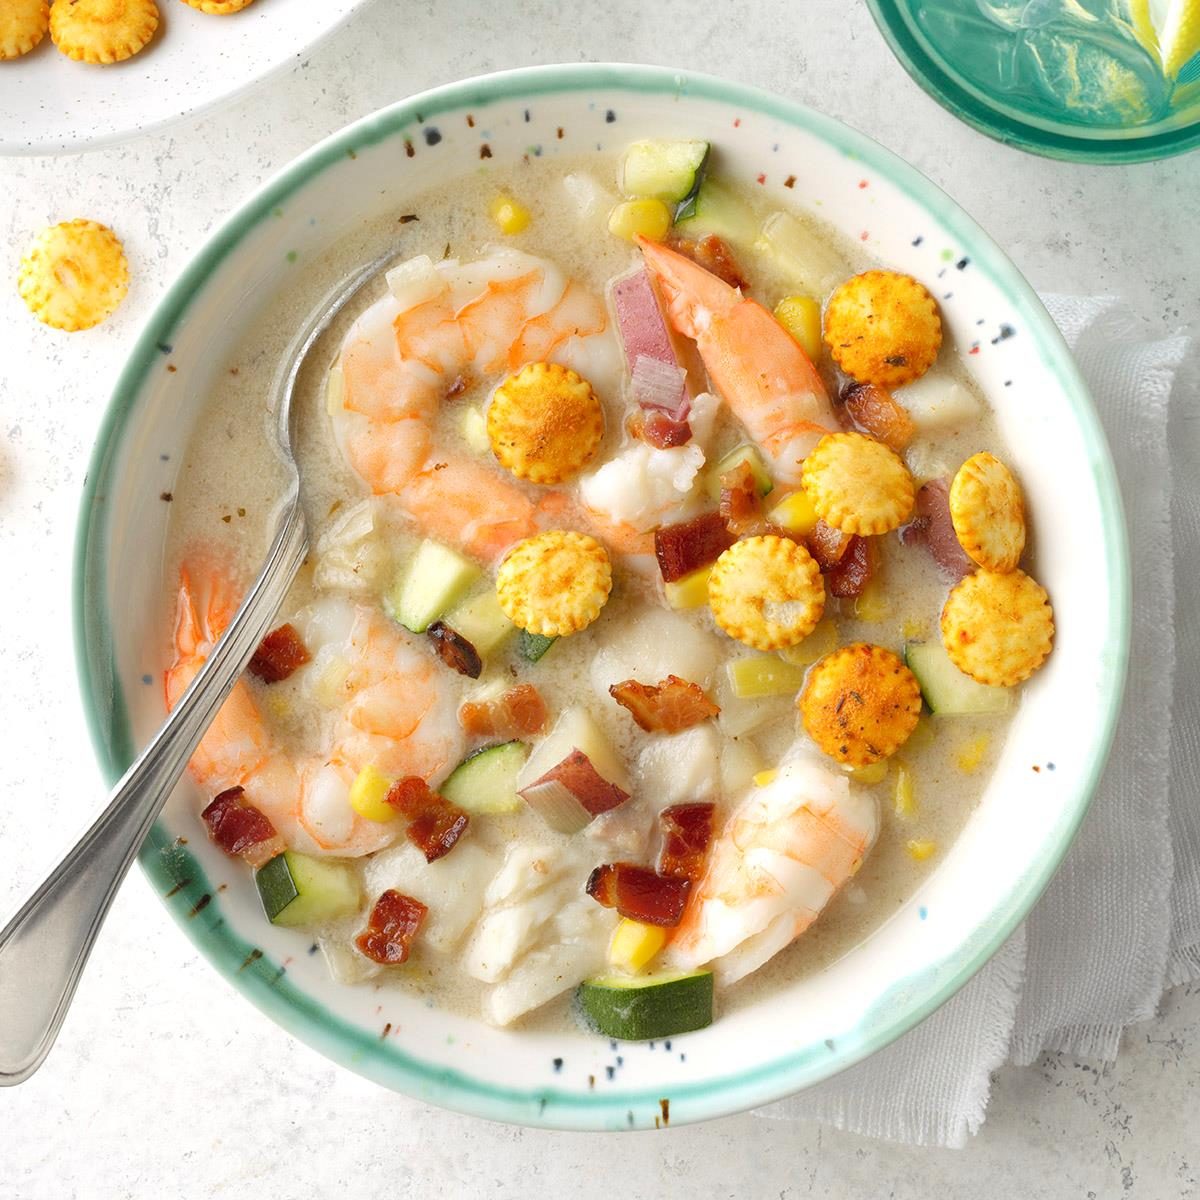 Day 2: Seafood Chowder with Seasoned Oyster Crackers